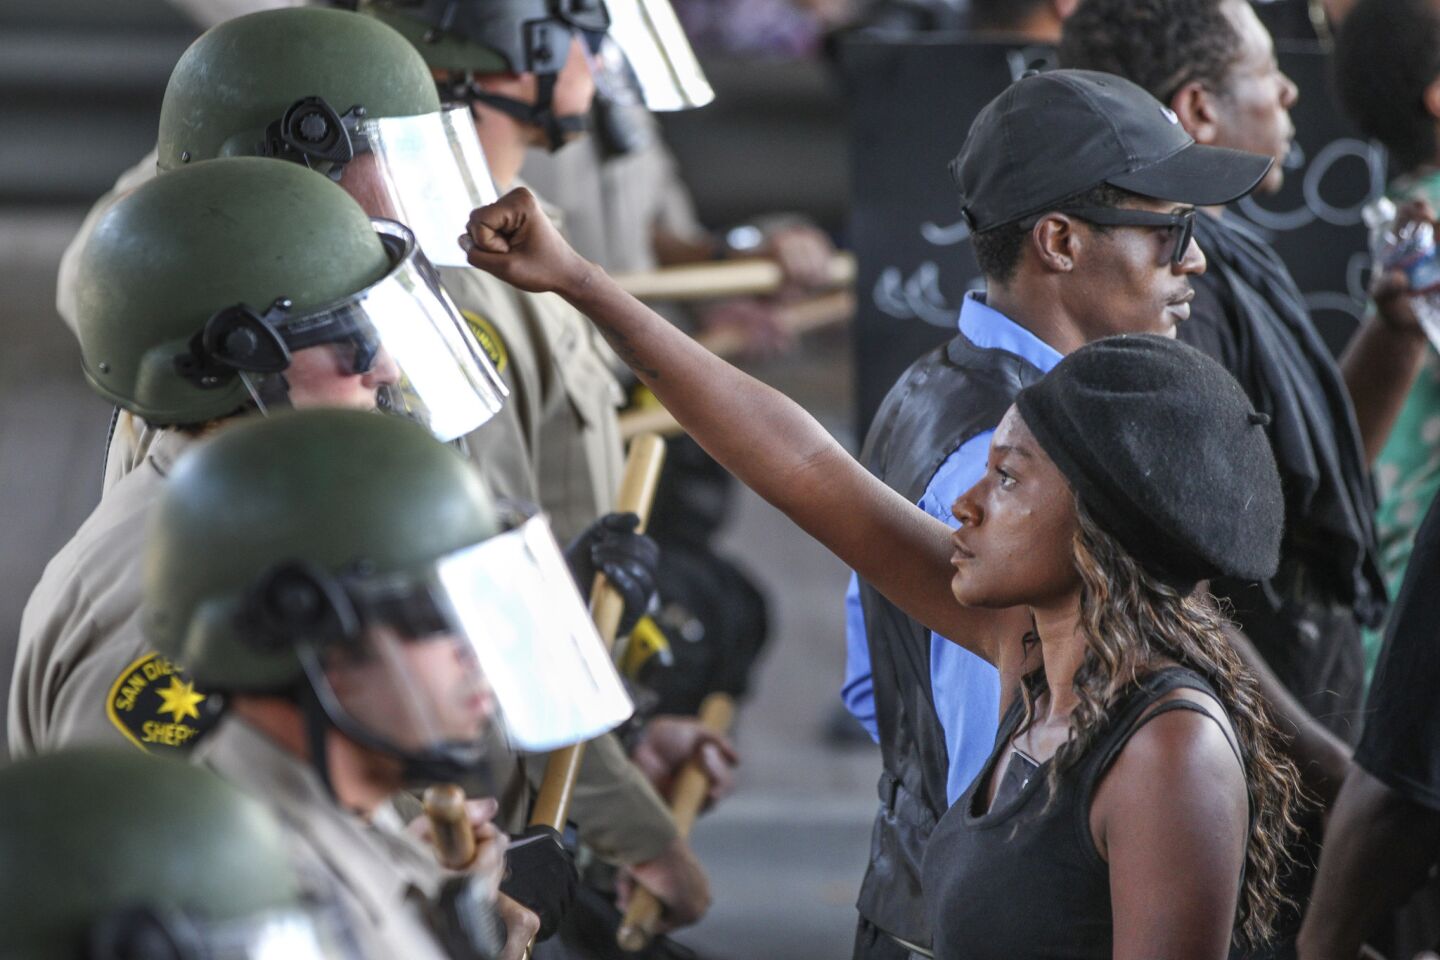 Ebonay Lee holds up her fist toward a line of Sheriff's deputies